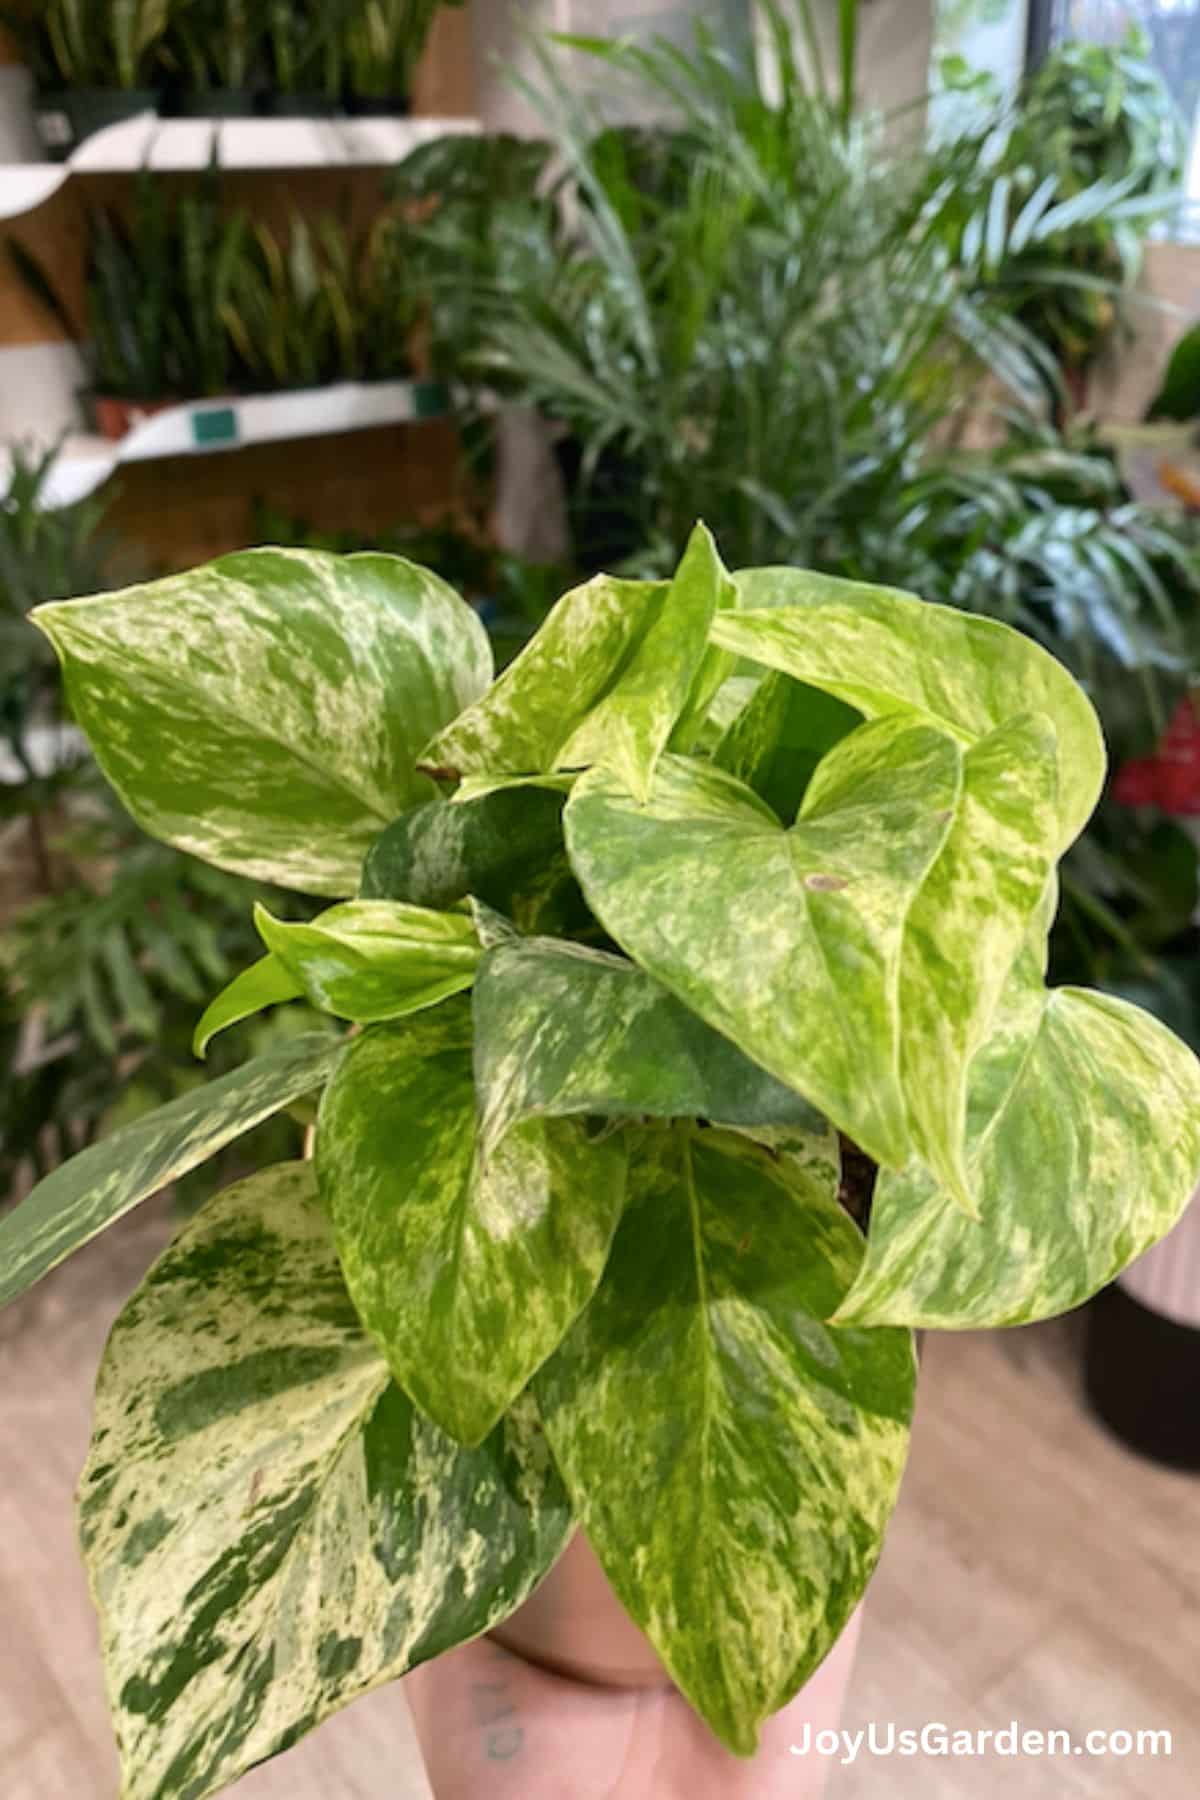 A Marble queen Pothos growing in a plant nursery in a clay pot.